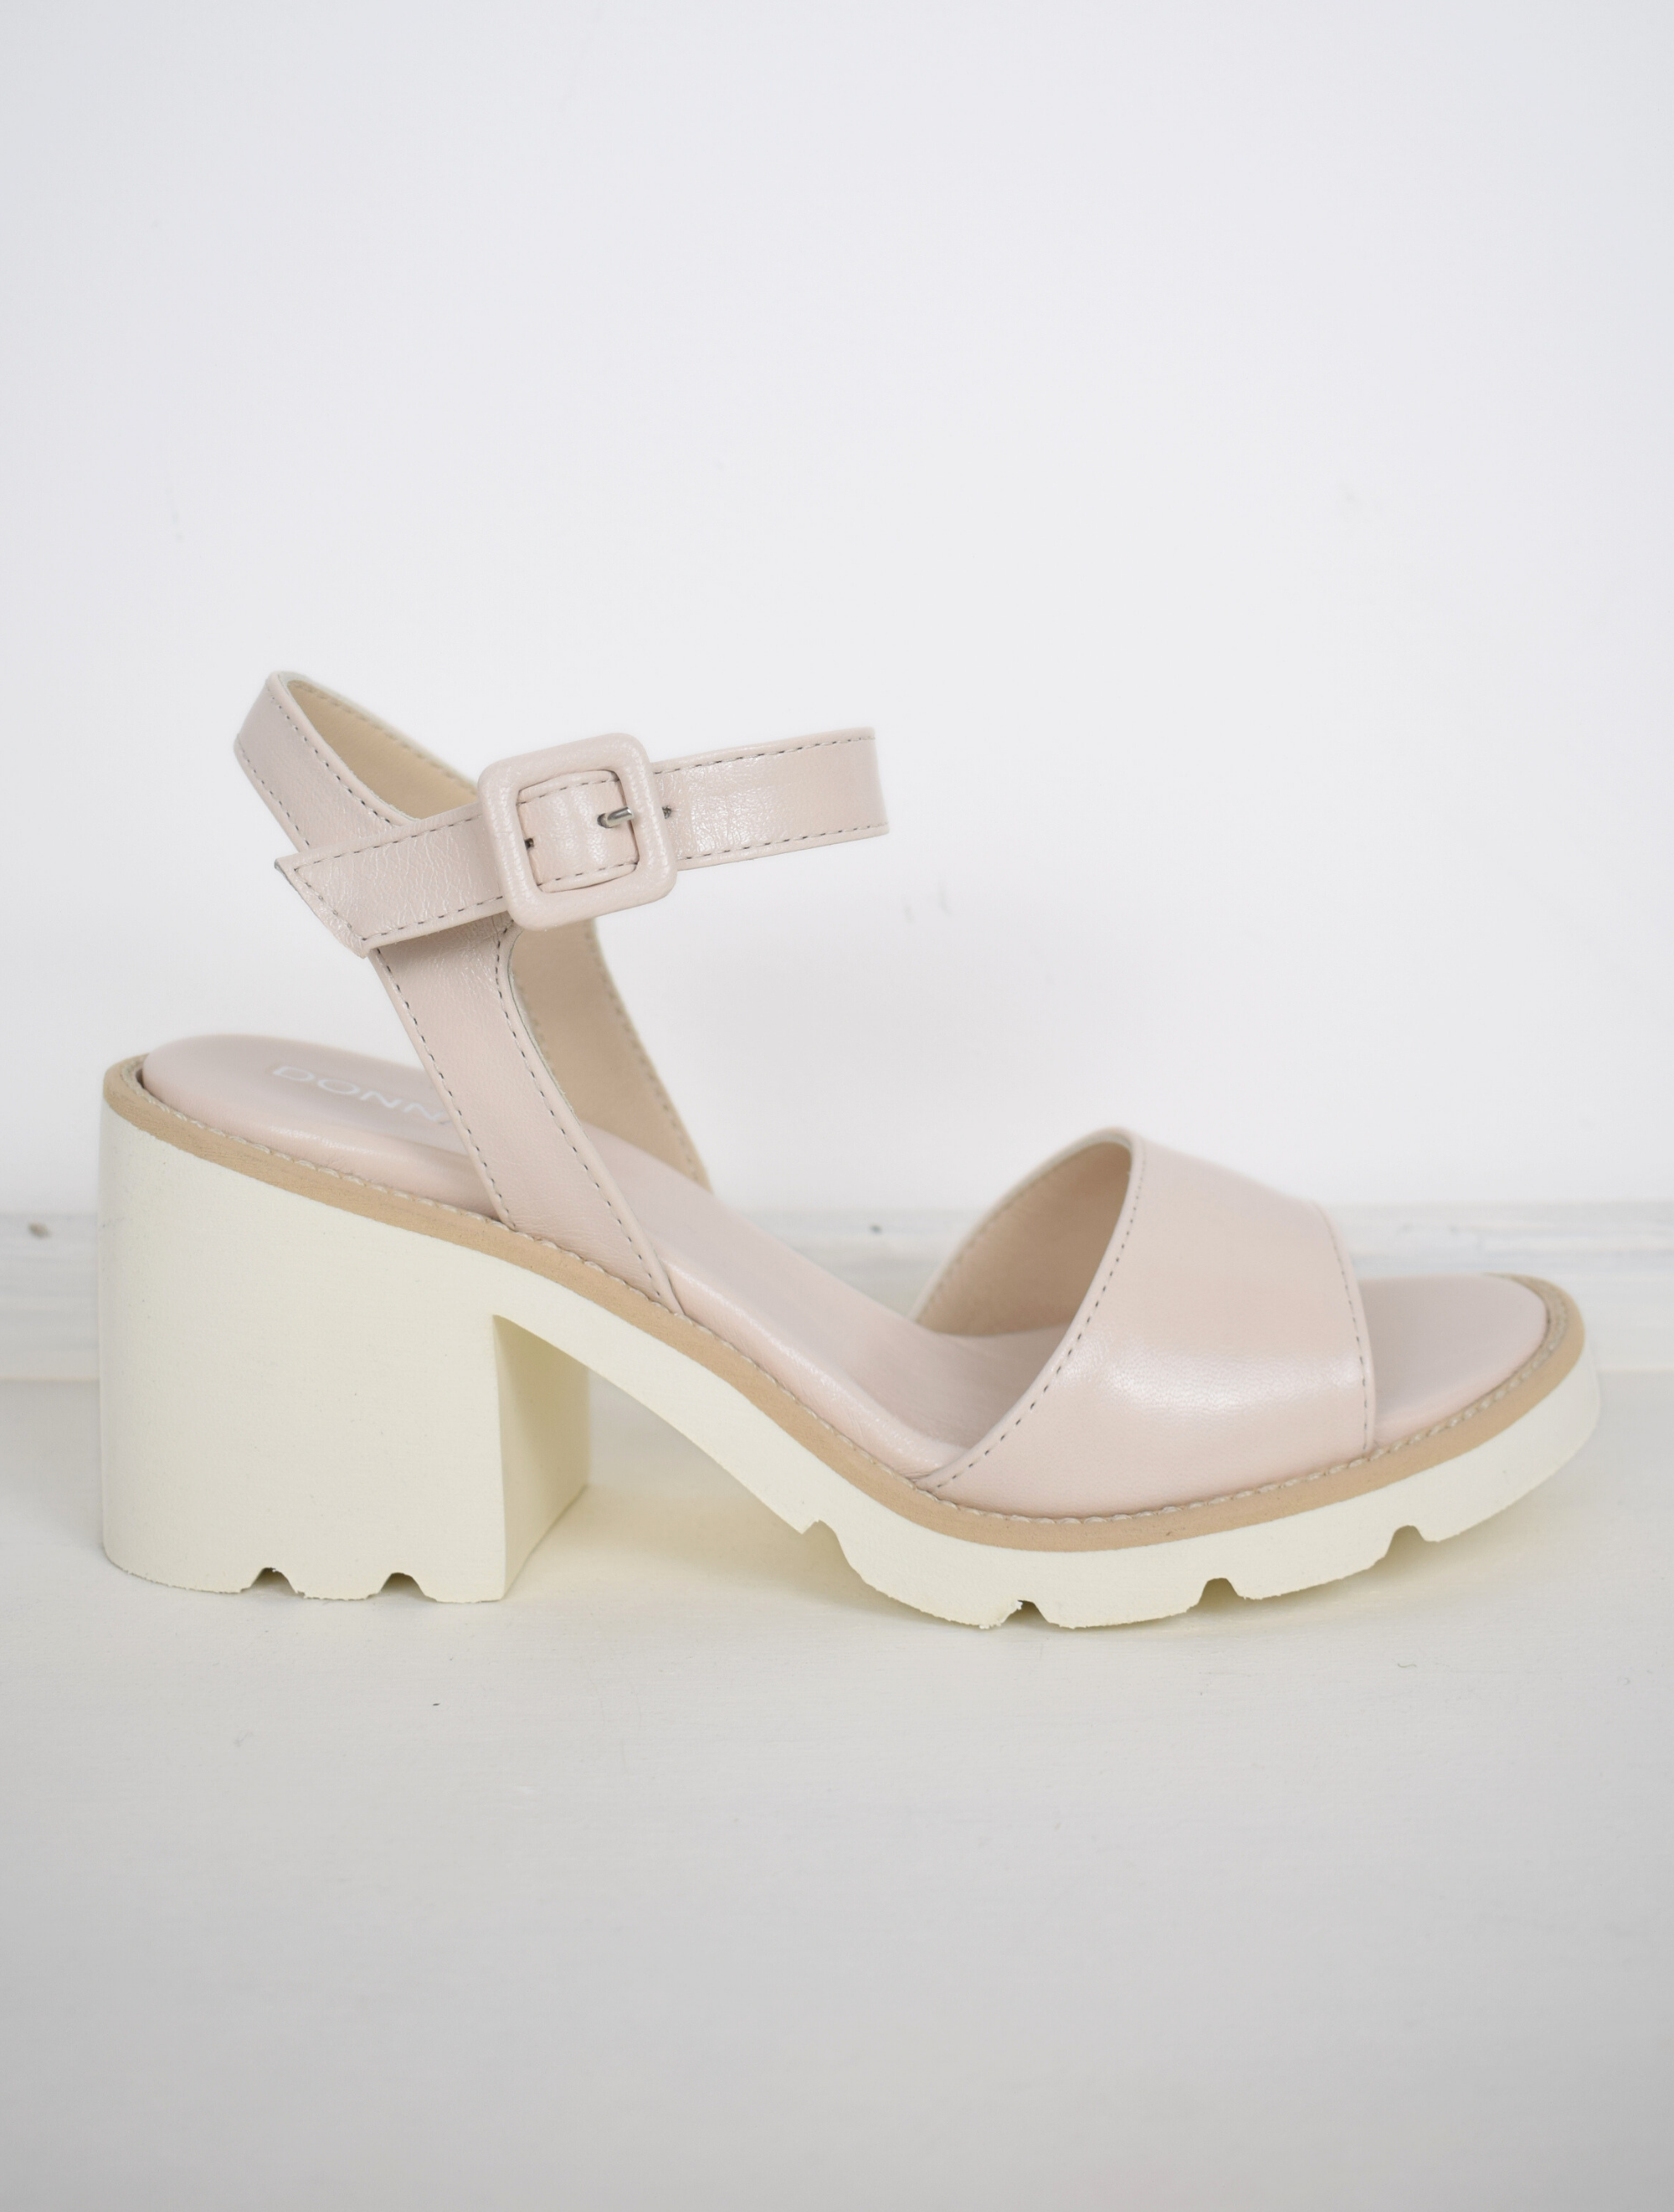 nude sandals with a white block heel 